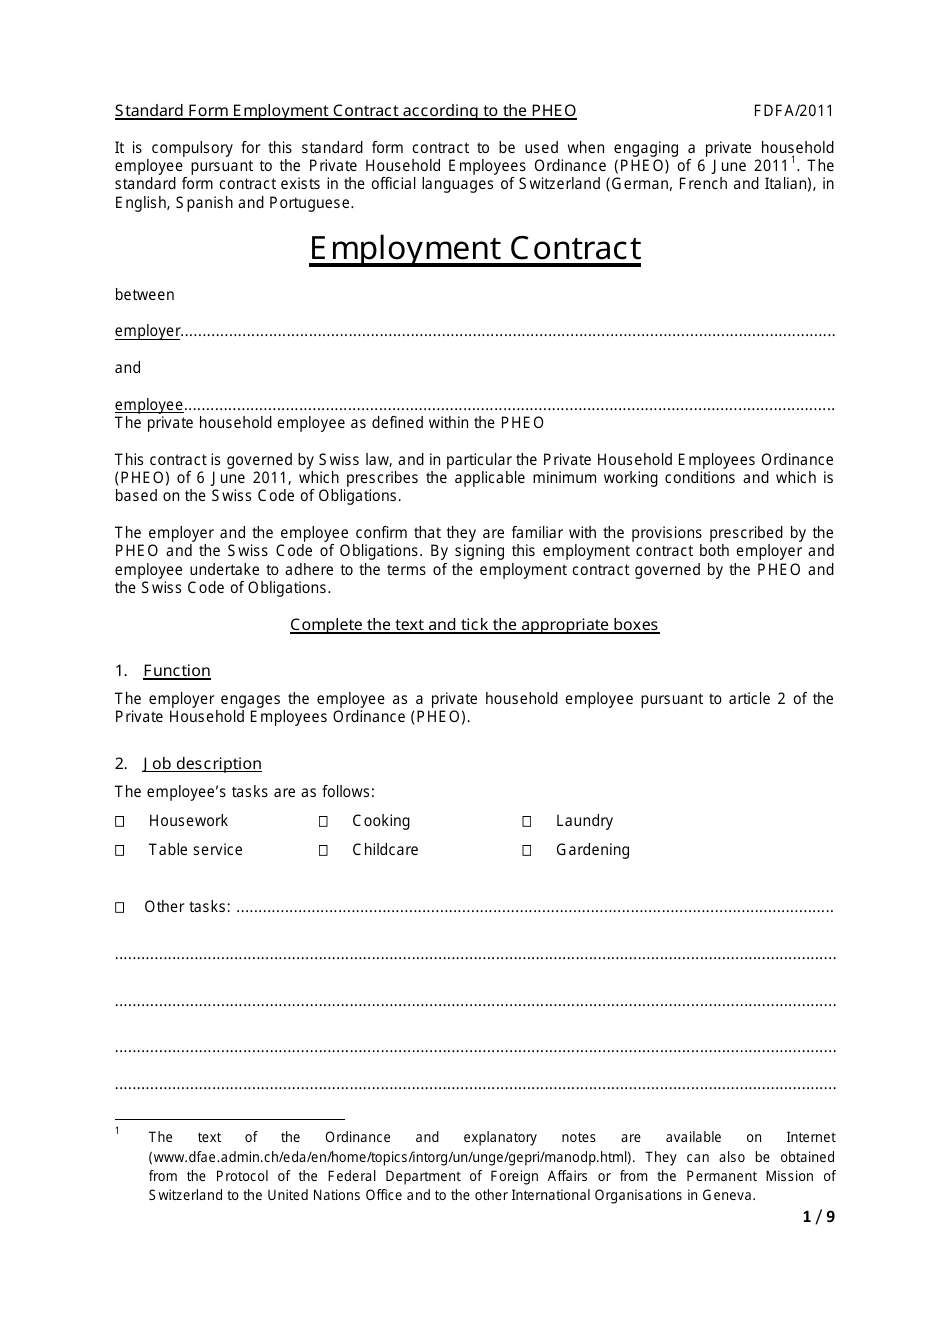 Employment Contract Standard Form - According to the Pheo - Switzerland, Page 1